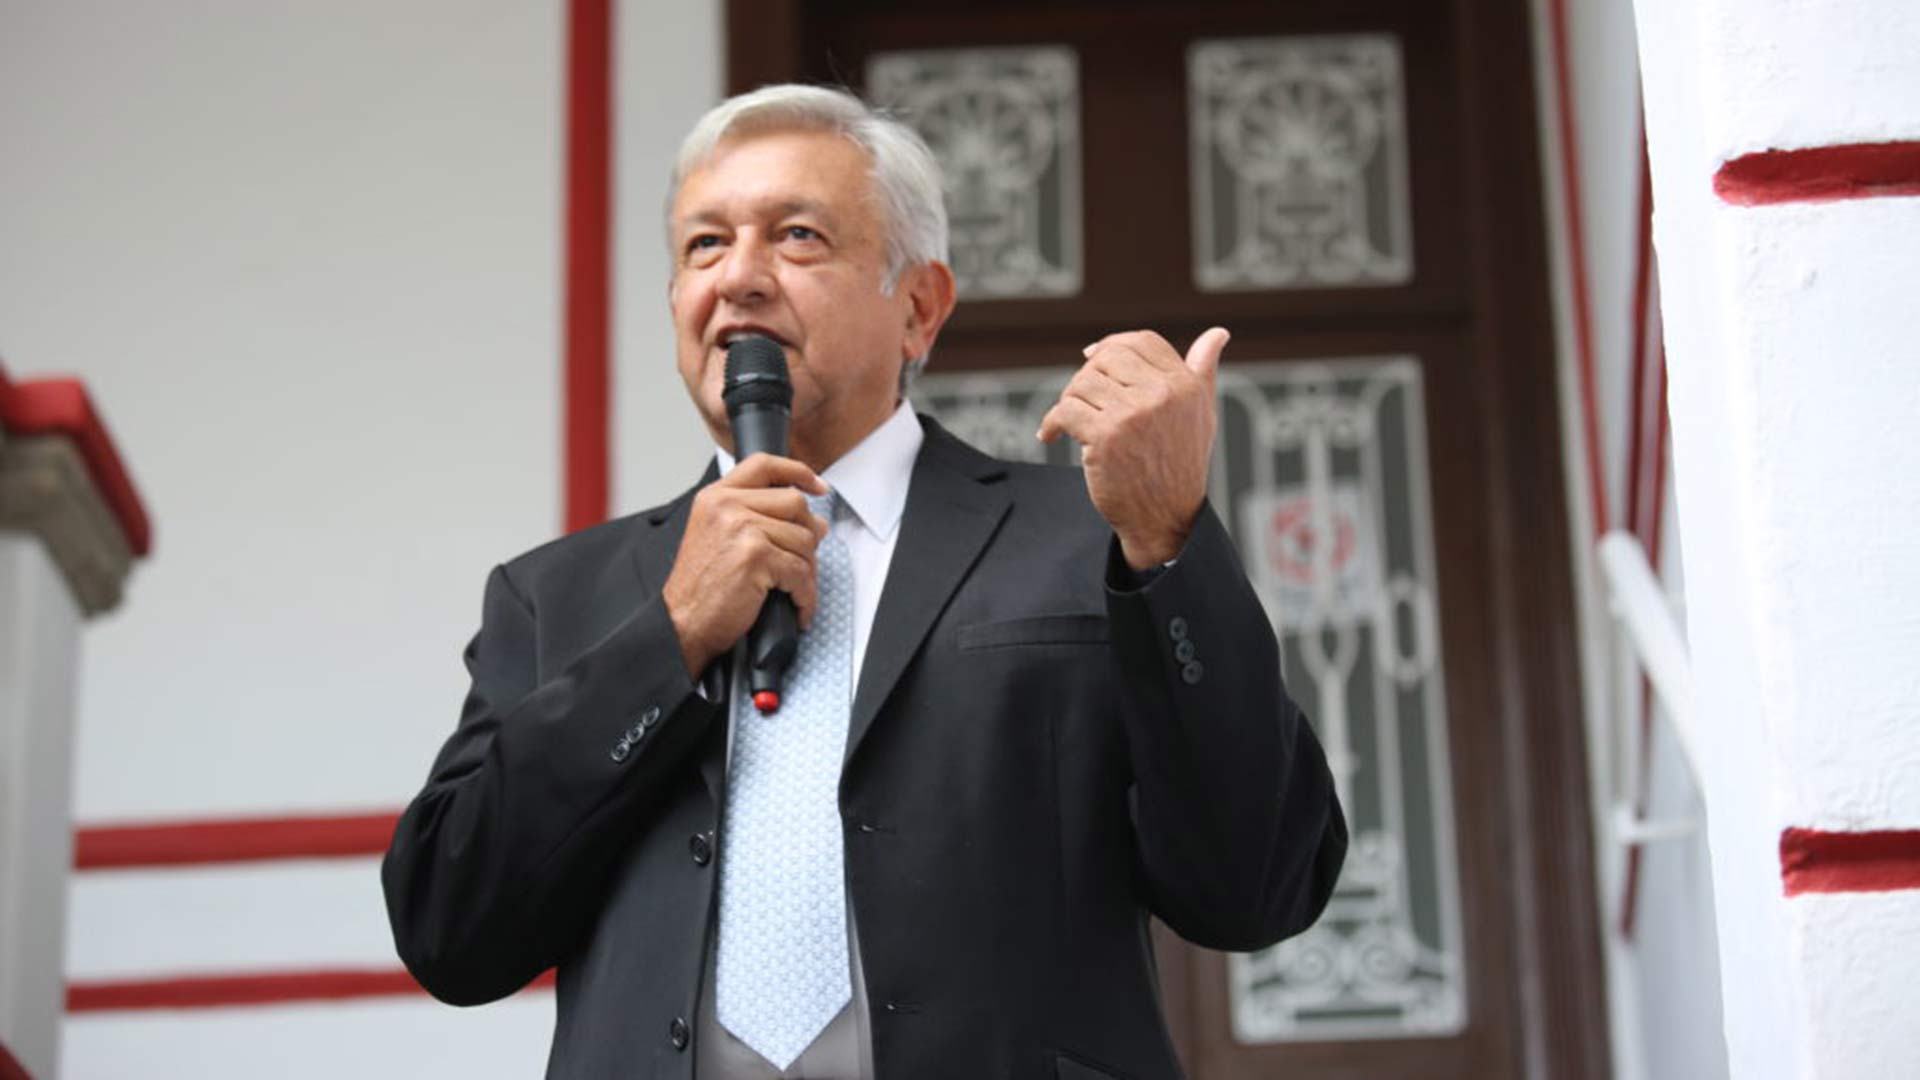 Mexican President-elect Andres Manuel Lopez Obrador says he'll push for anti-poverty programs in meeting with members of the U.S. Cabinet.